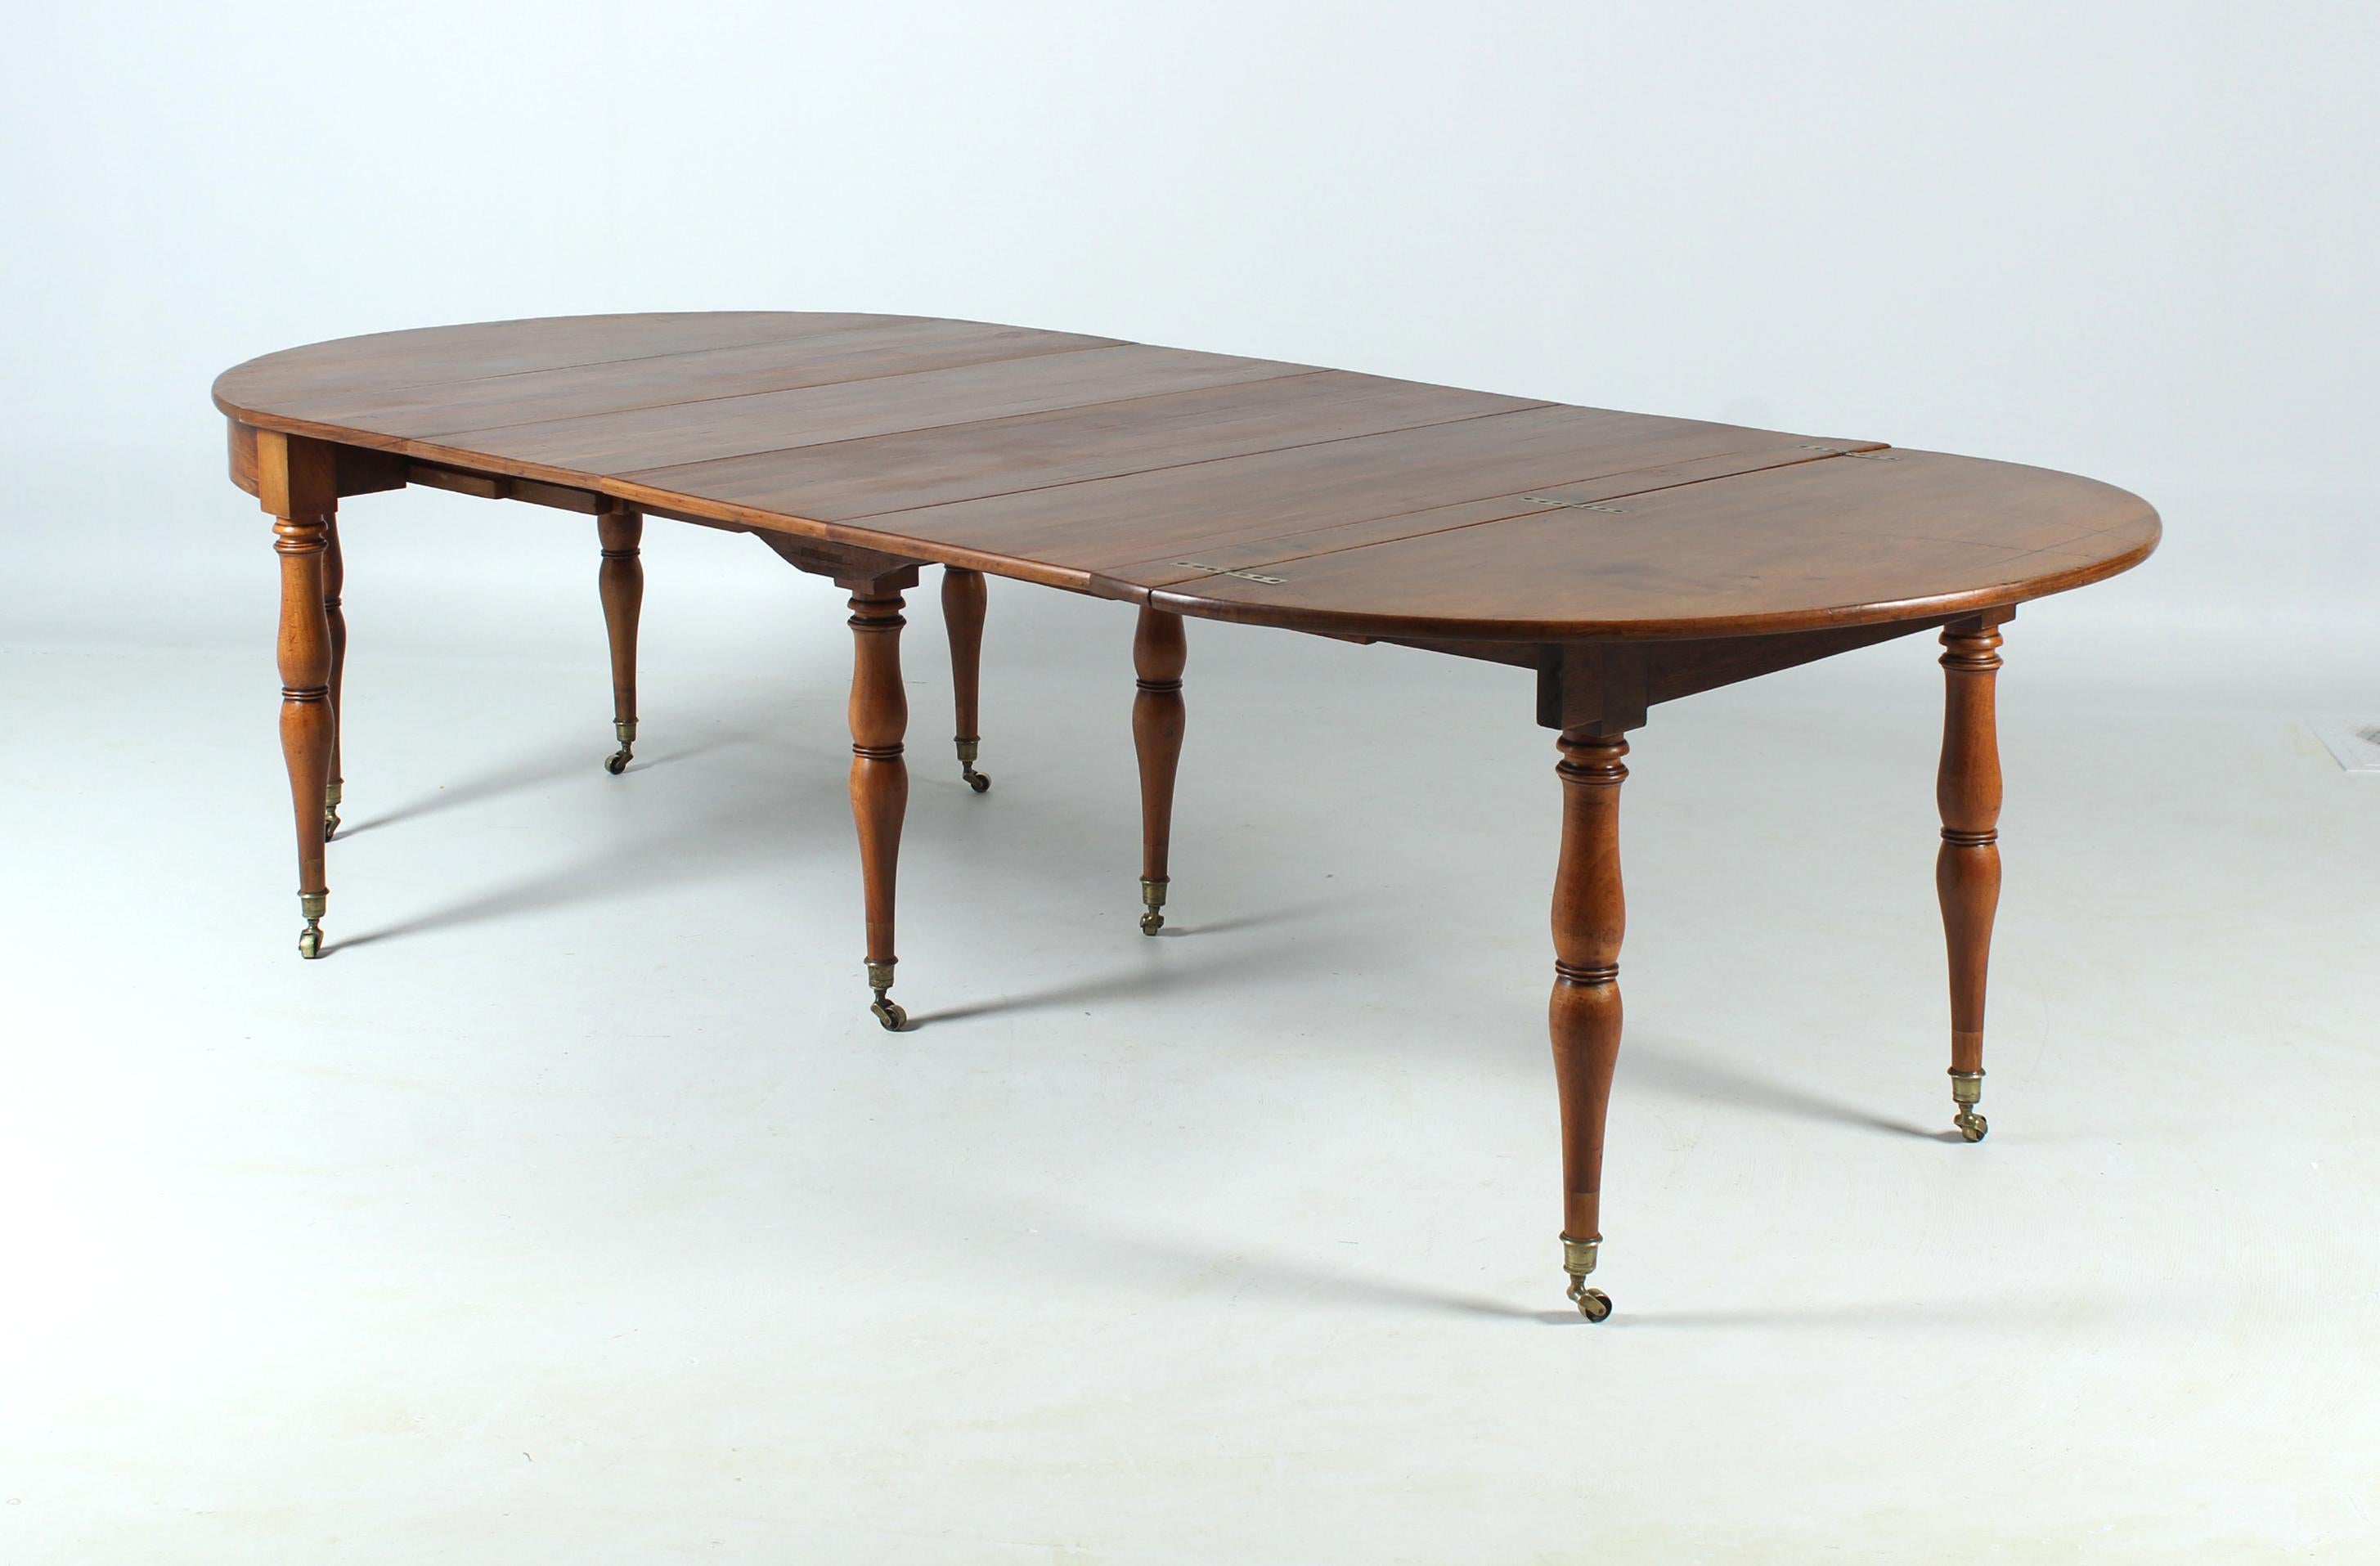 Large antique dining table, walnut with patina, round and extendable

France
Walnut
around 1860

Dimensions: H x W x L: 76 x 129 x 62 cm - extendable to 284 cm

Description:
Quite exceptional antique solid walnut dining table with quite